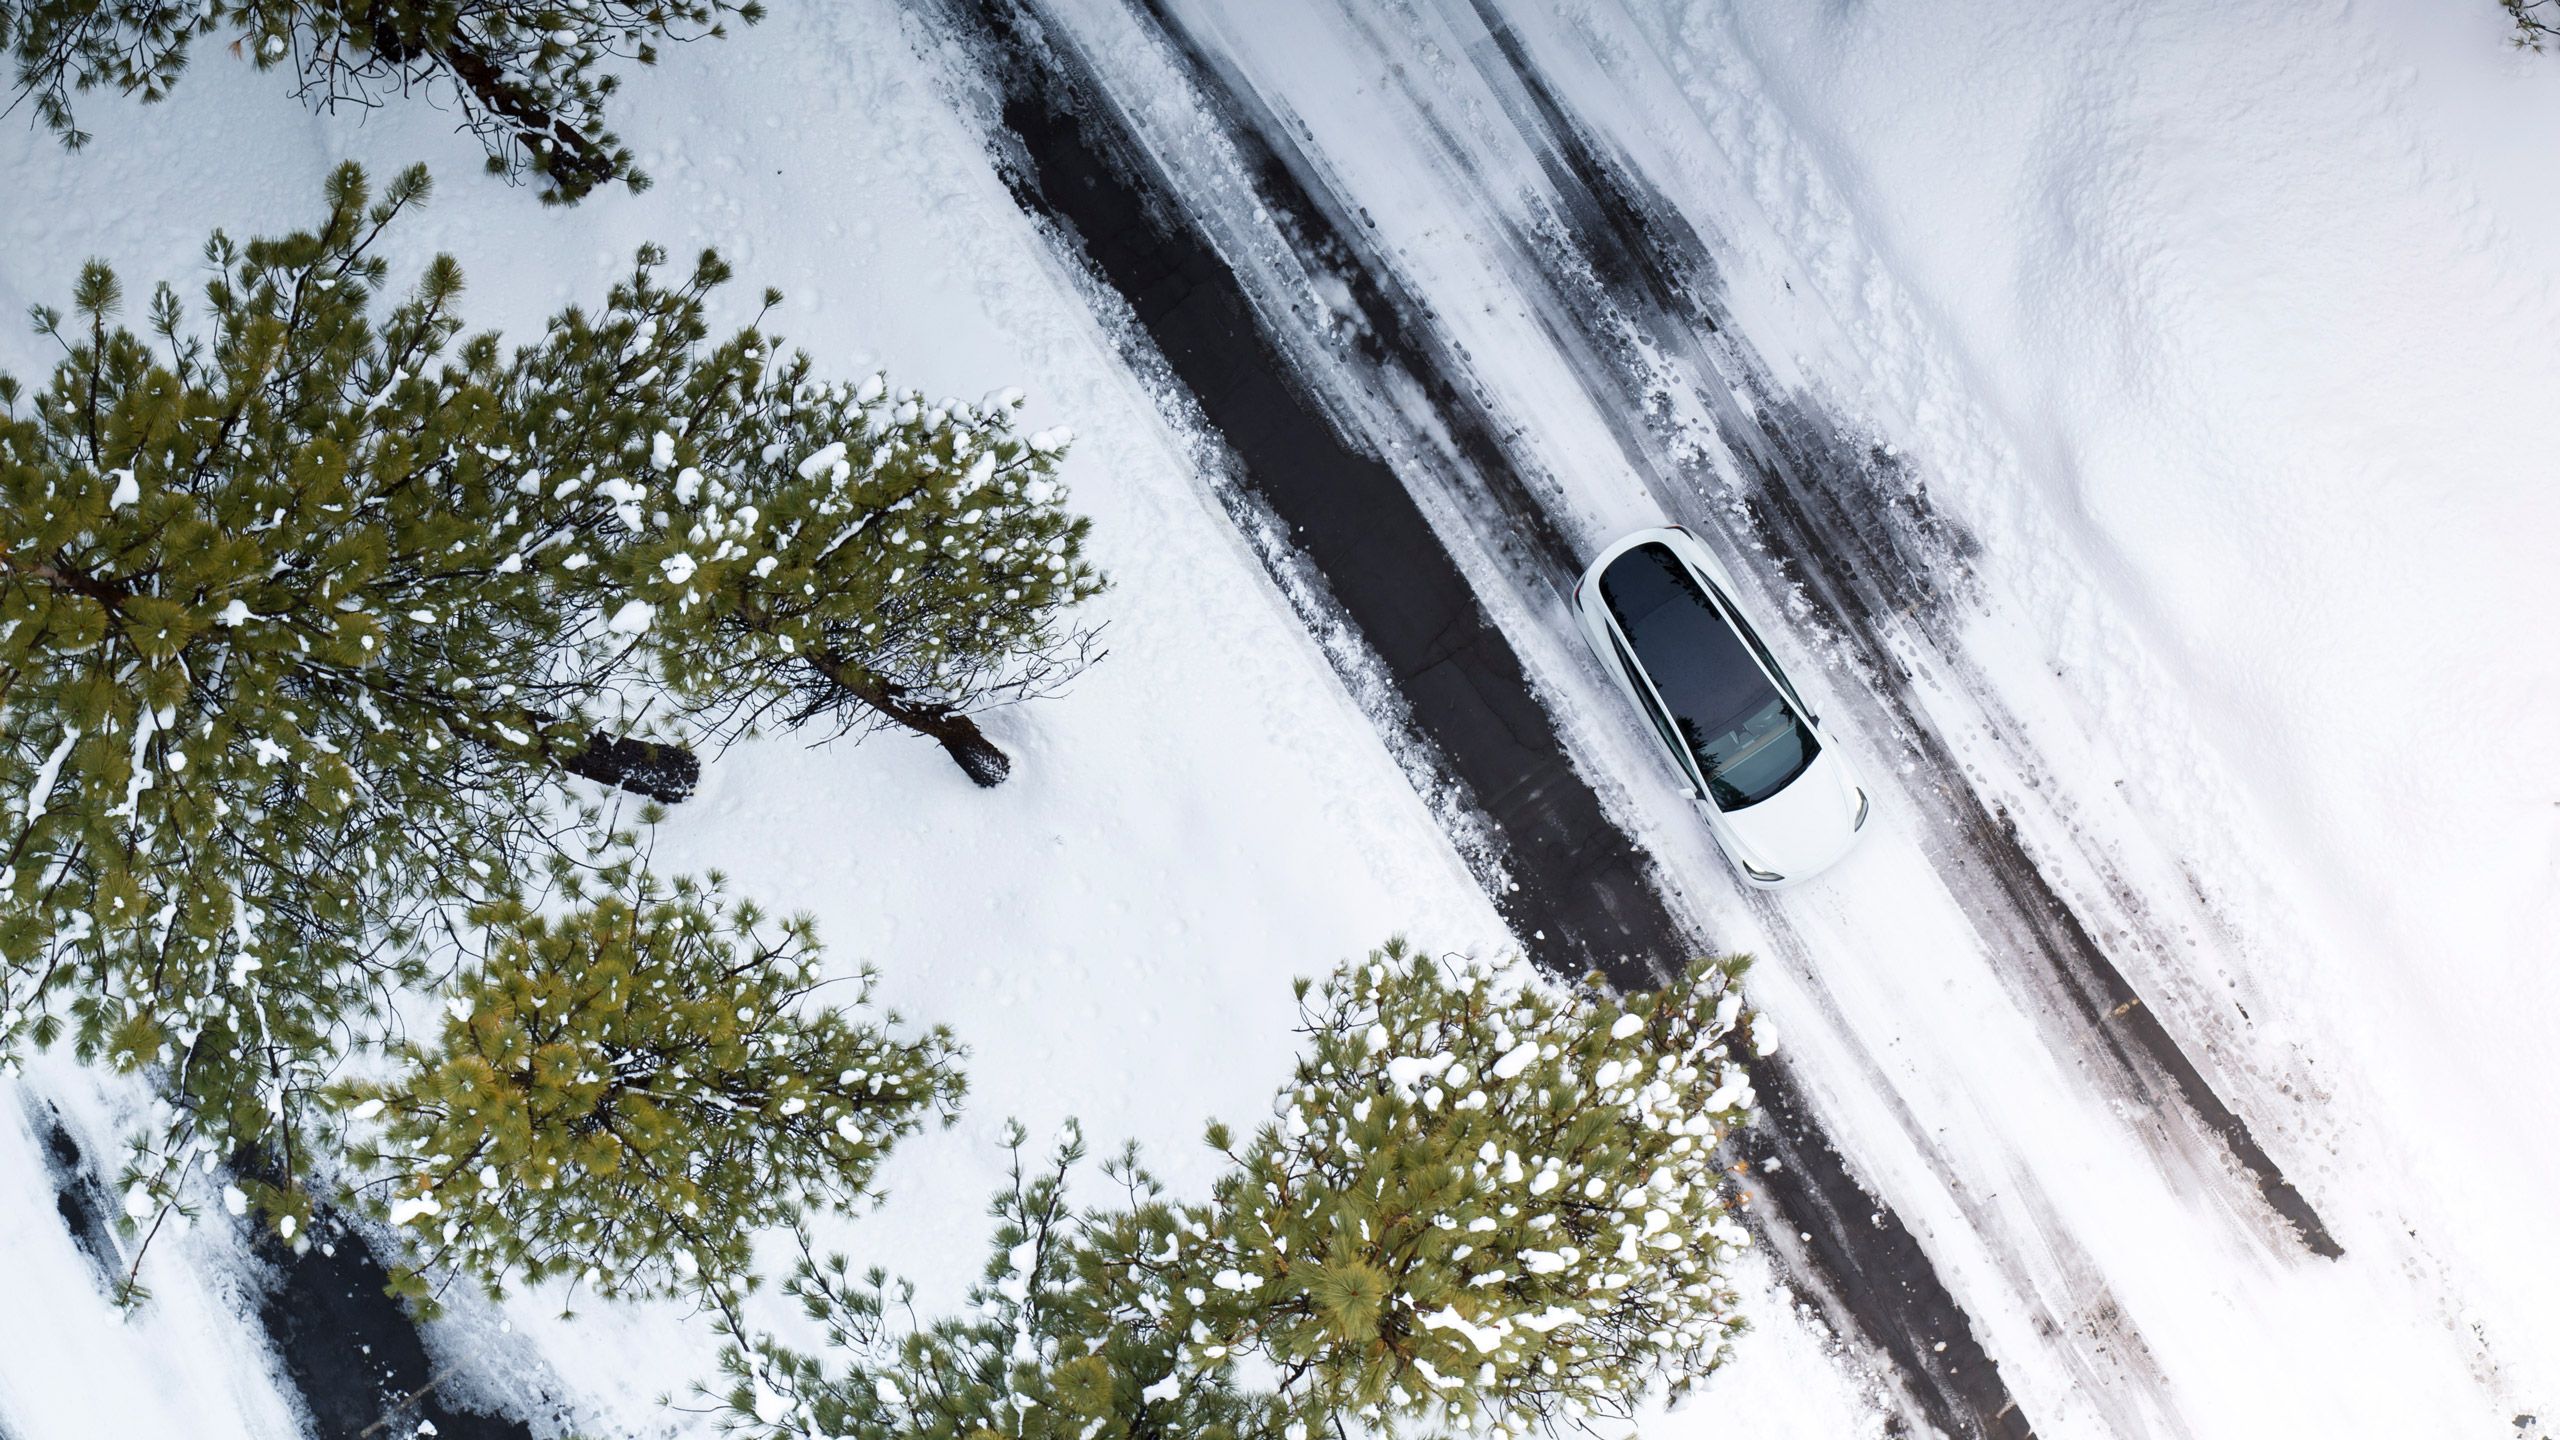 A white Tesla Model Y travels on a snowy road with pine trees off to the side